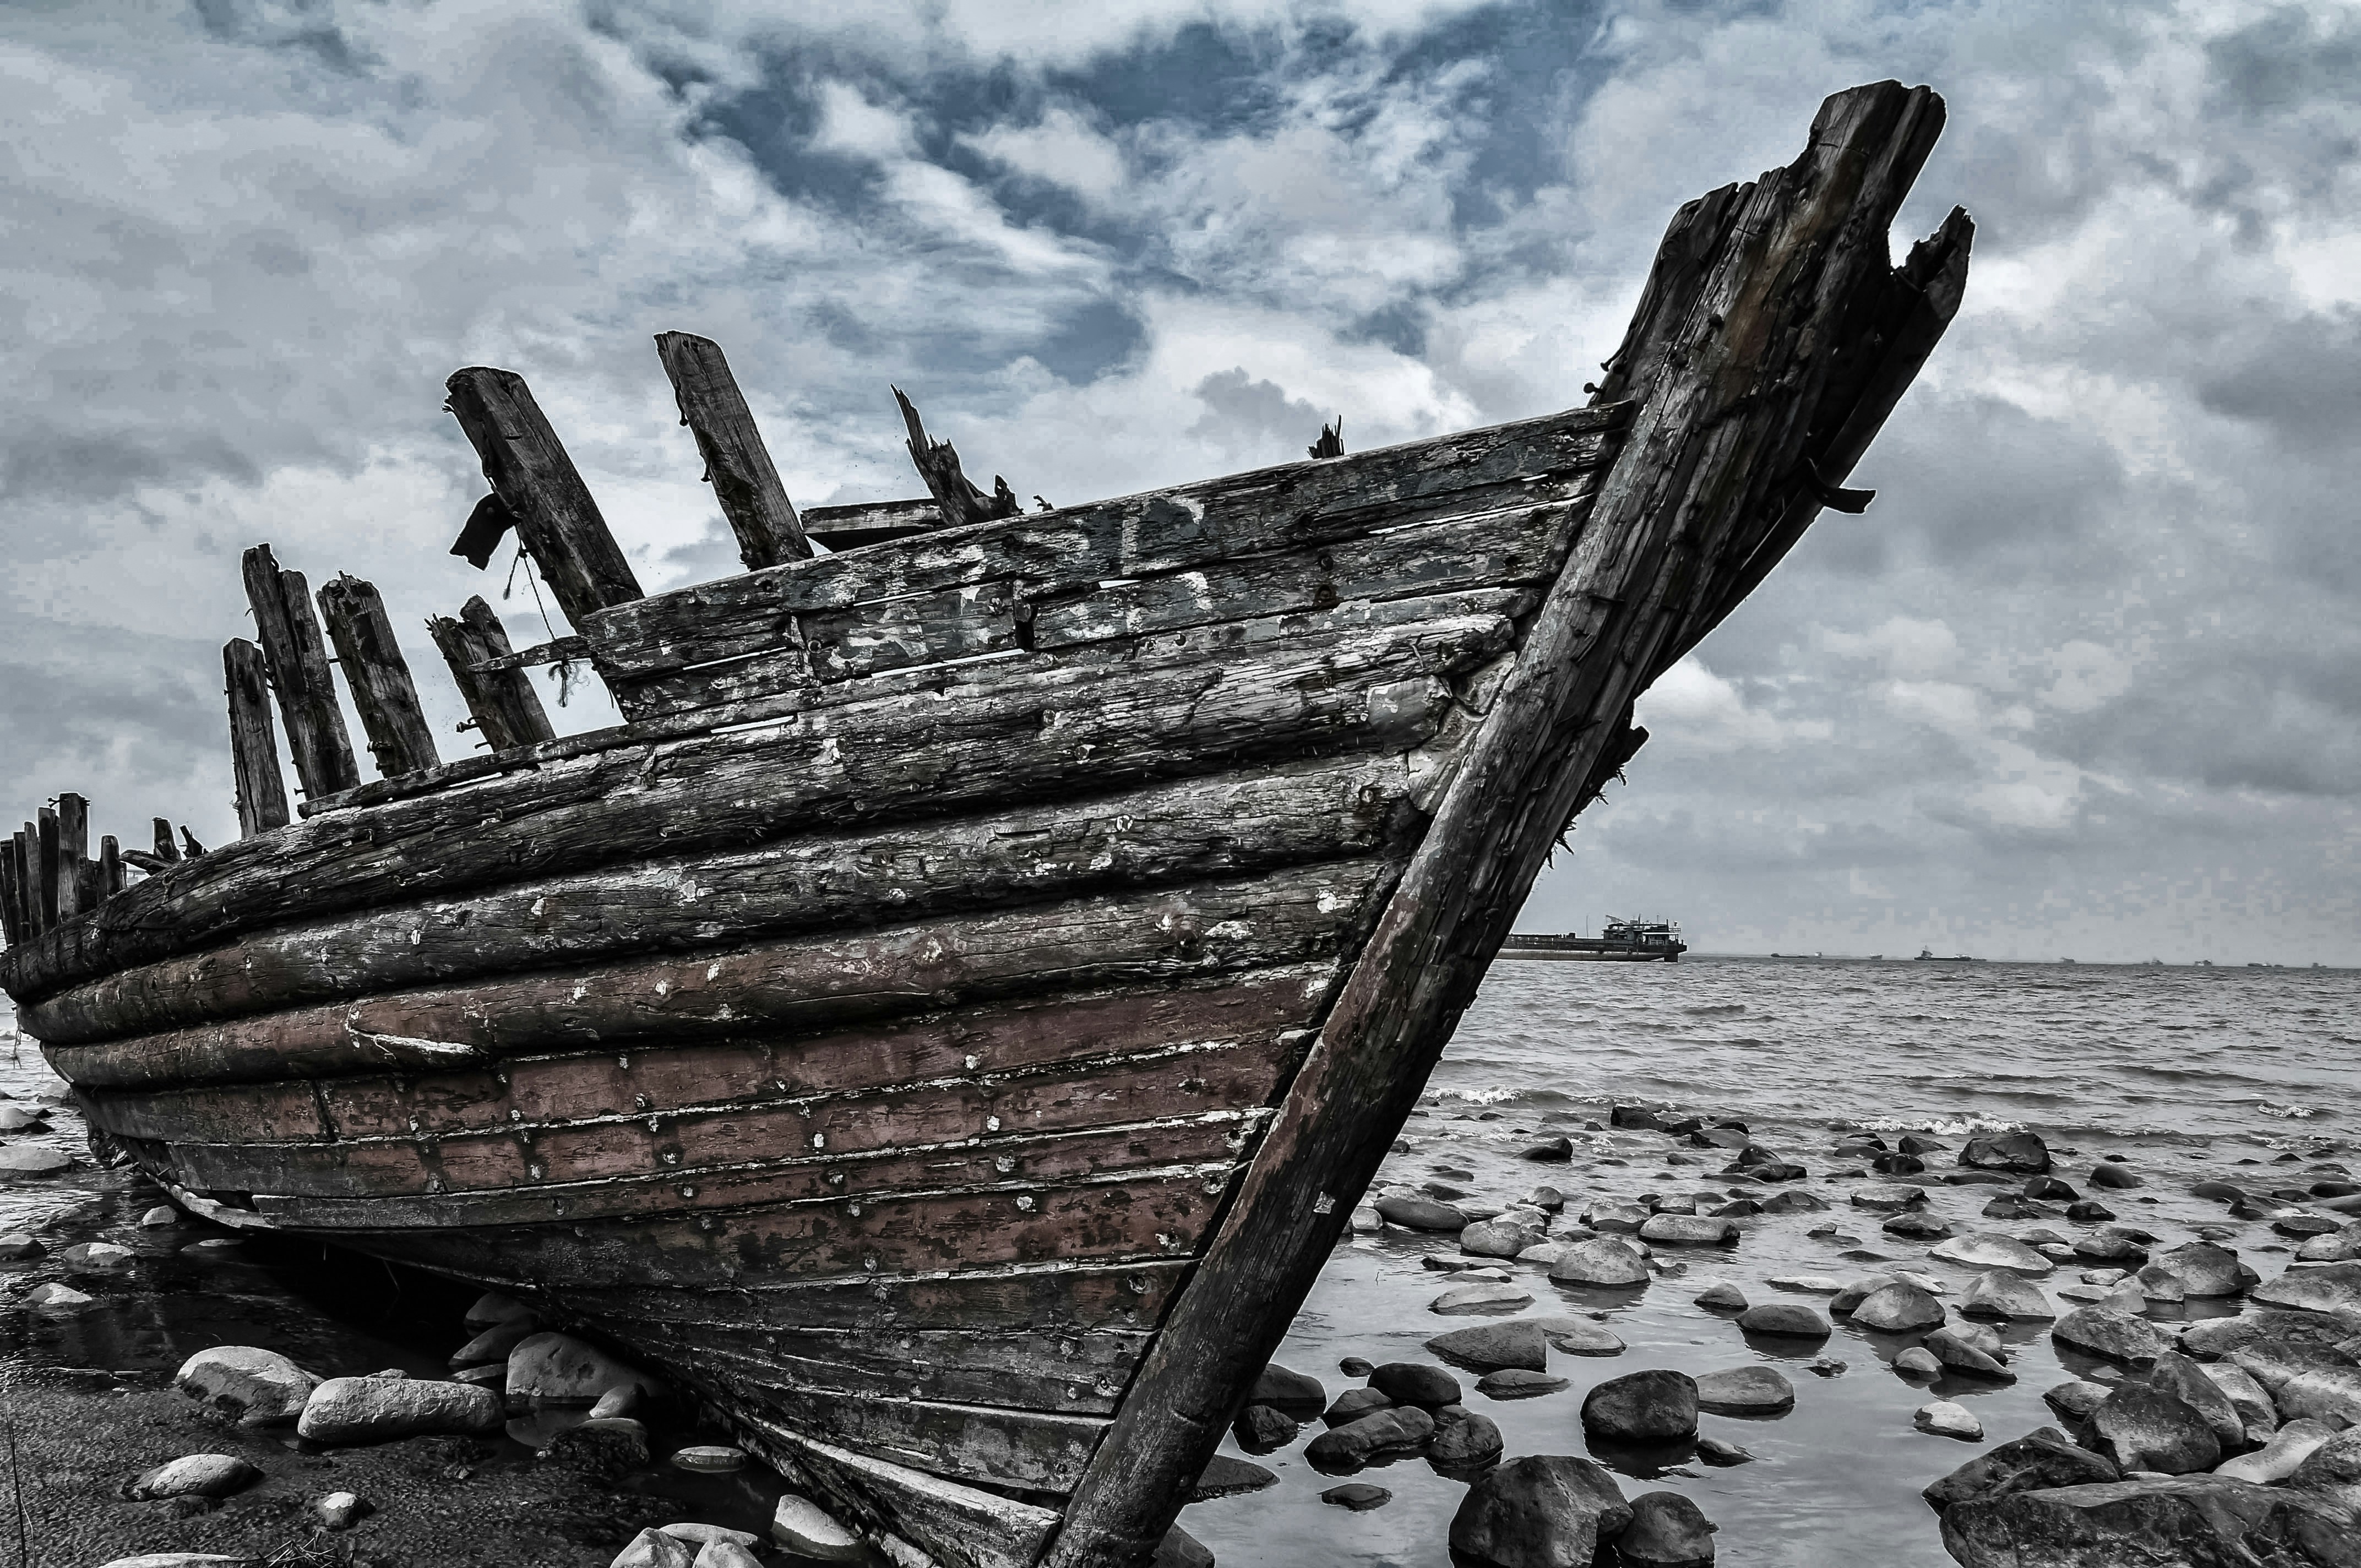 A decaying timber boat hull, stranded on a rocky sea shore